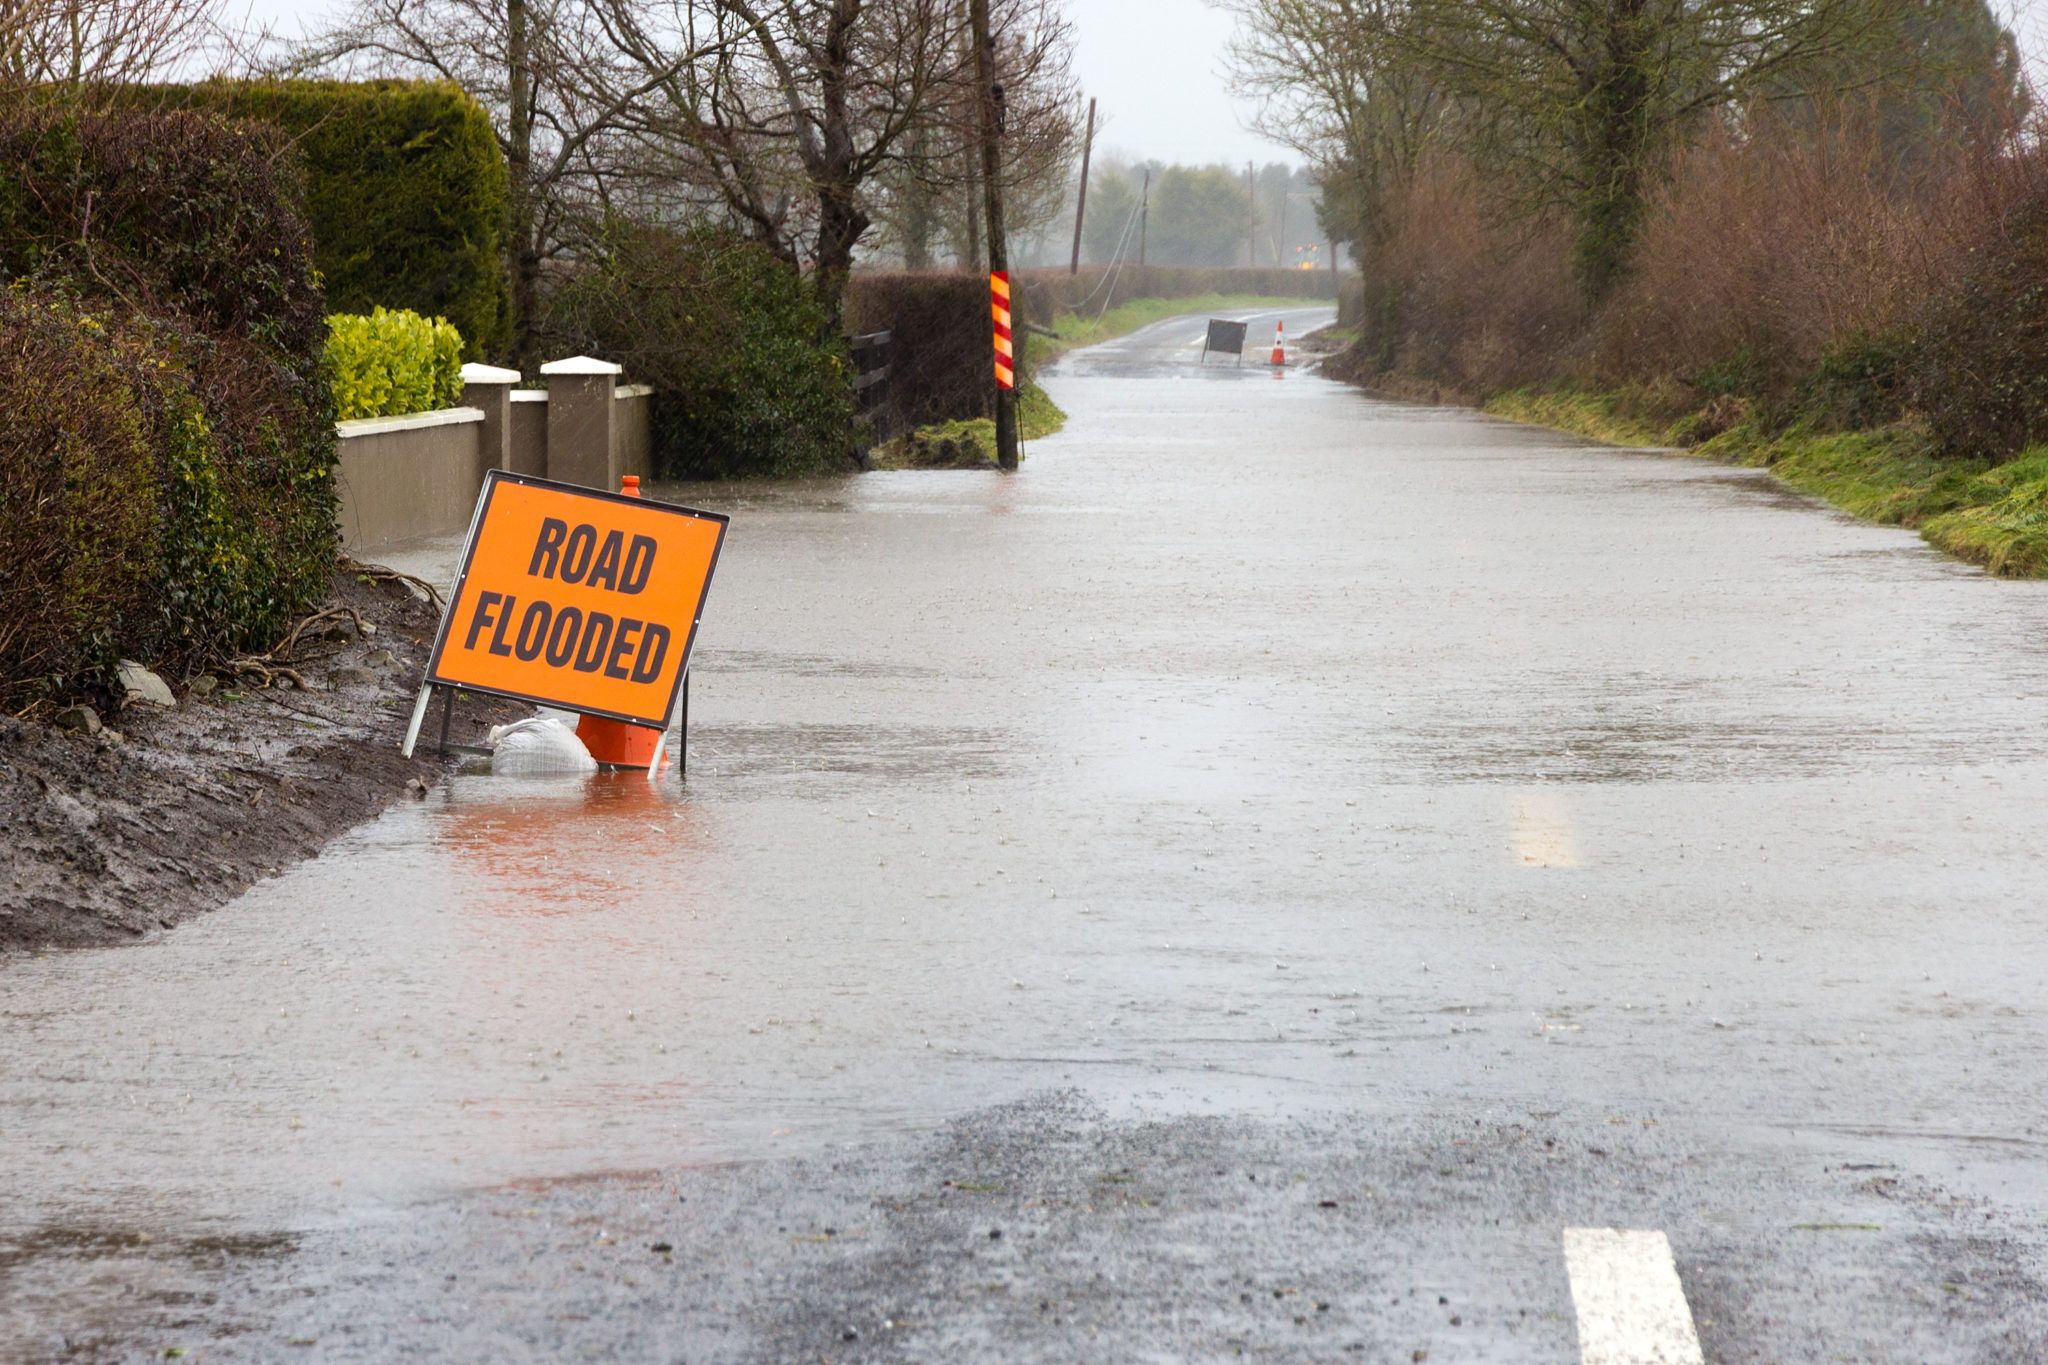 Rainfall warning issued for four counties